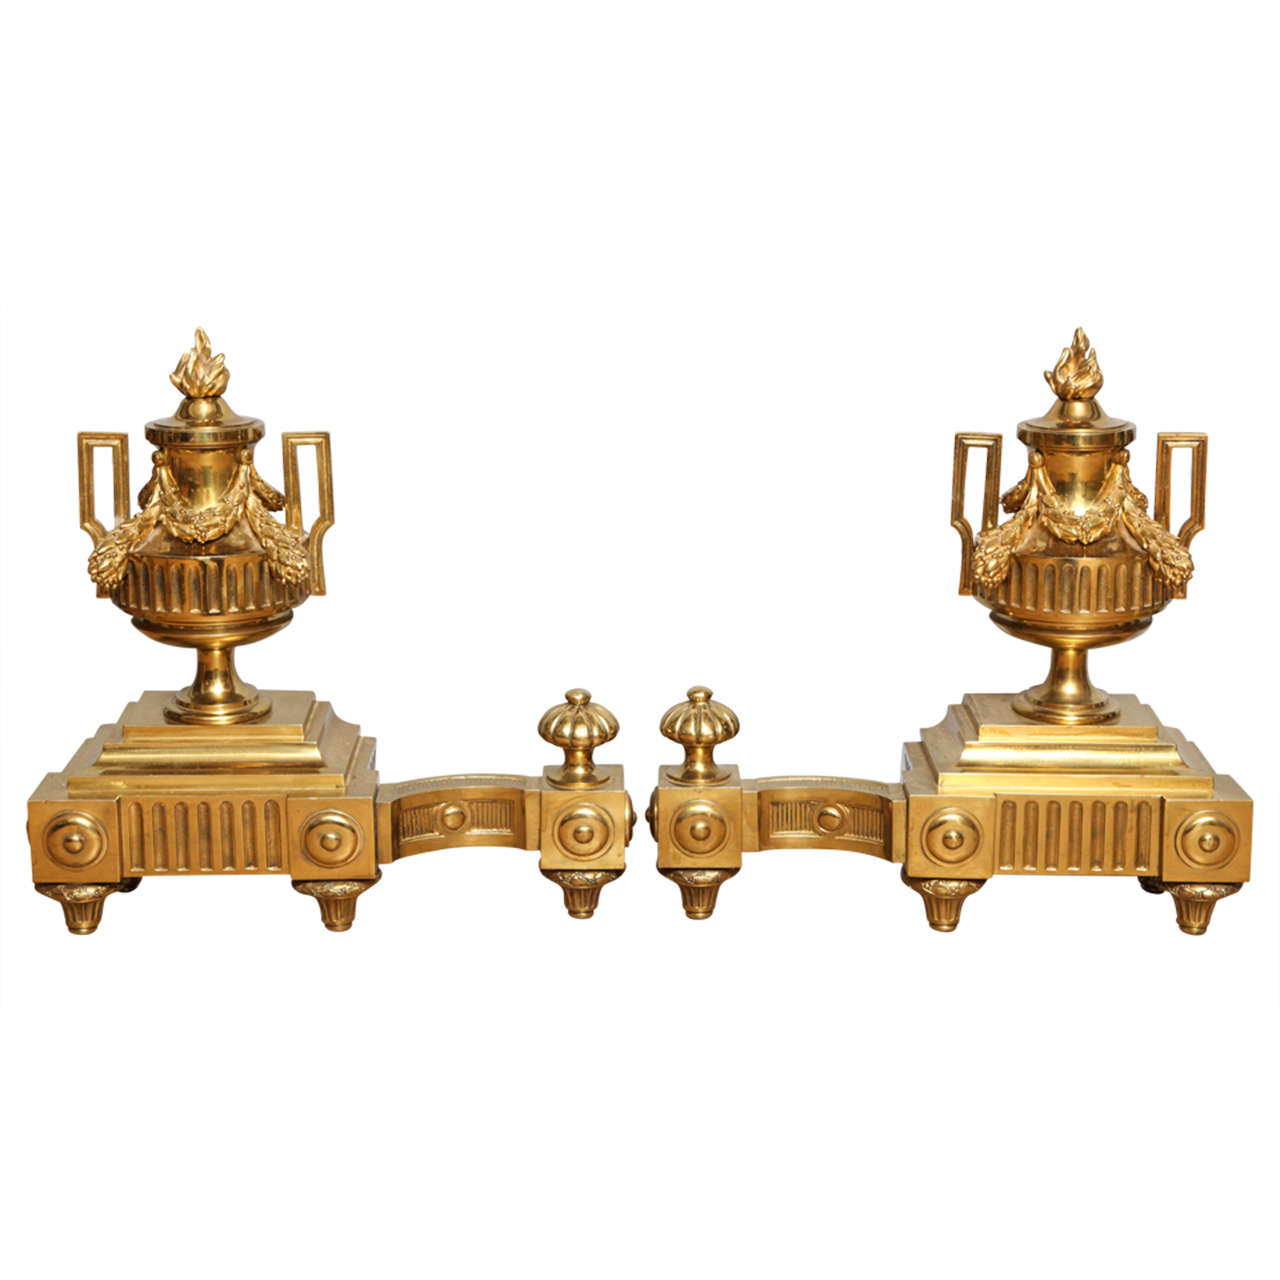 A Pair of Louis XVI Style Andirons